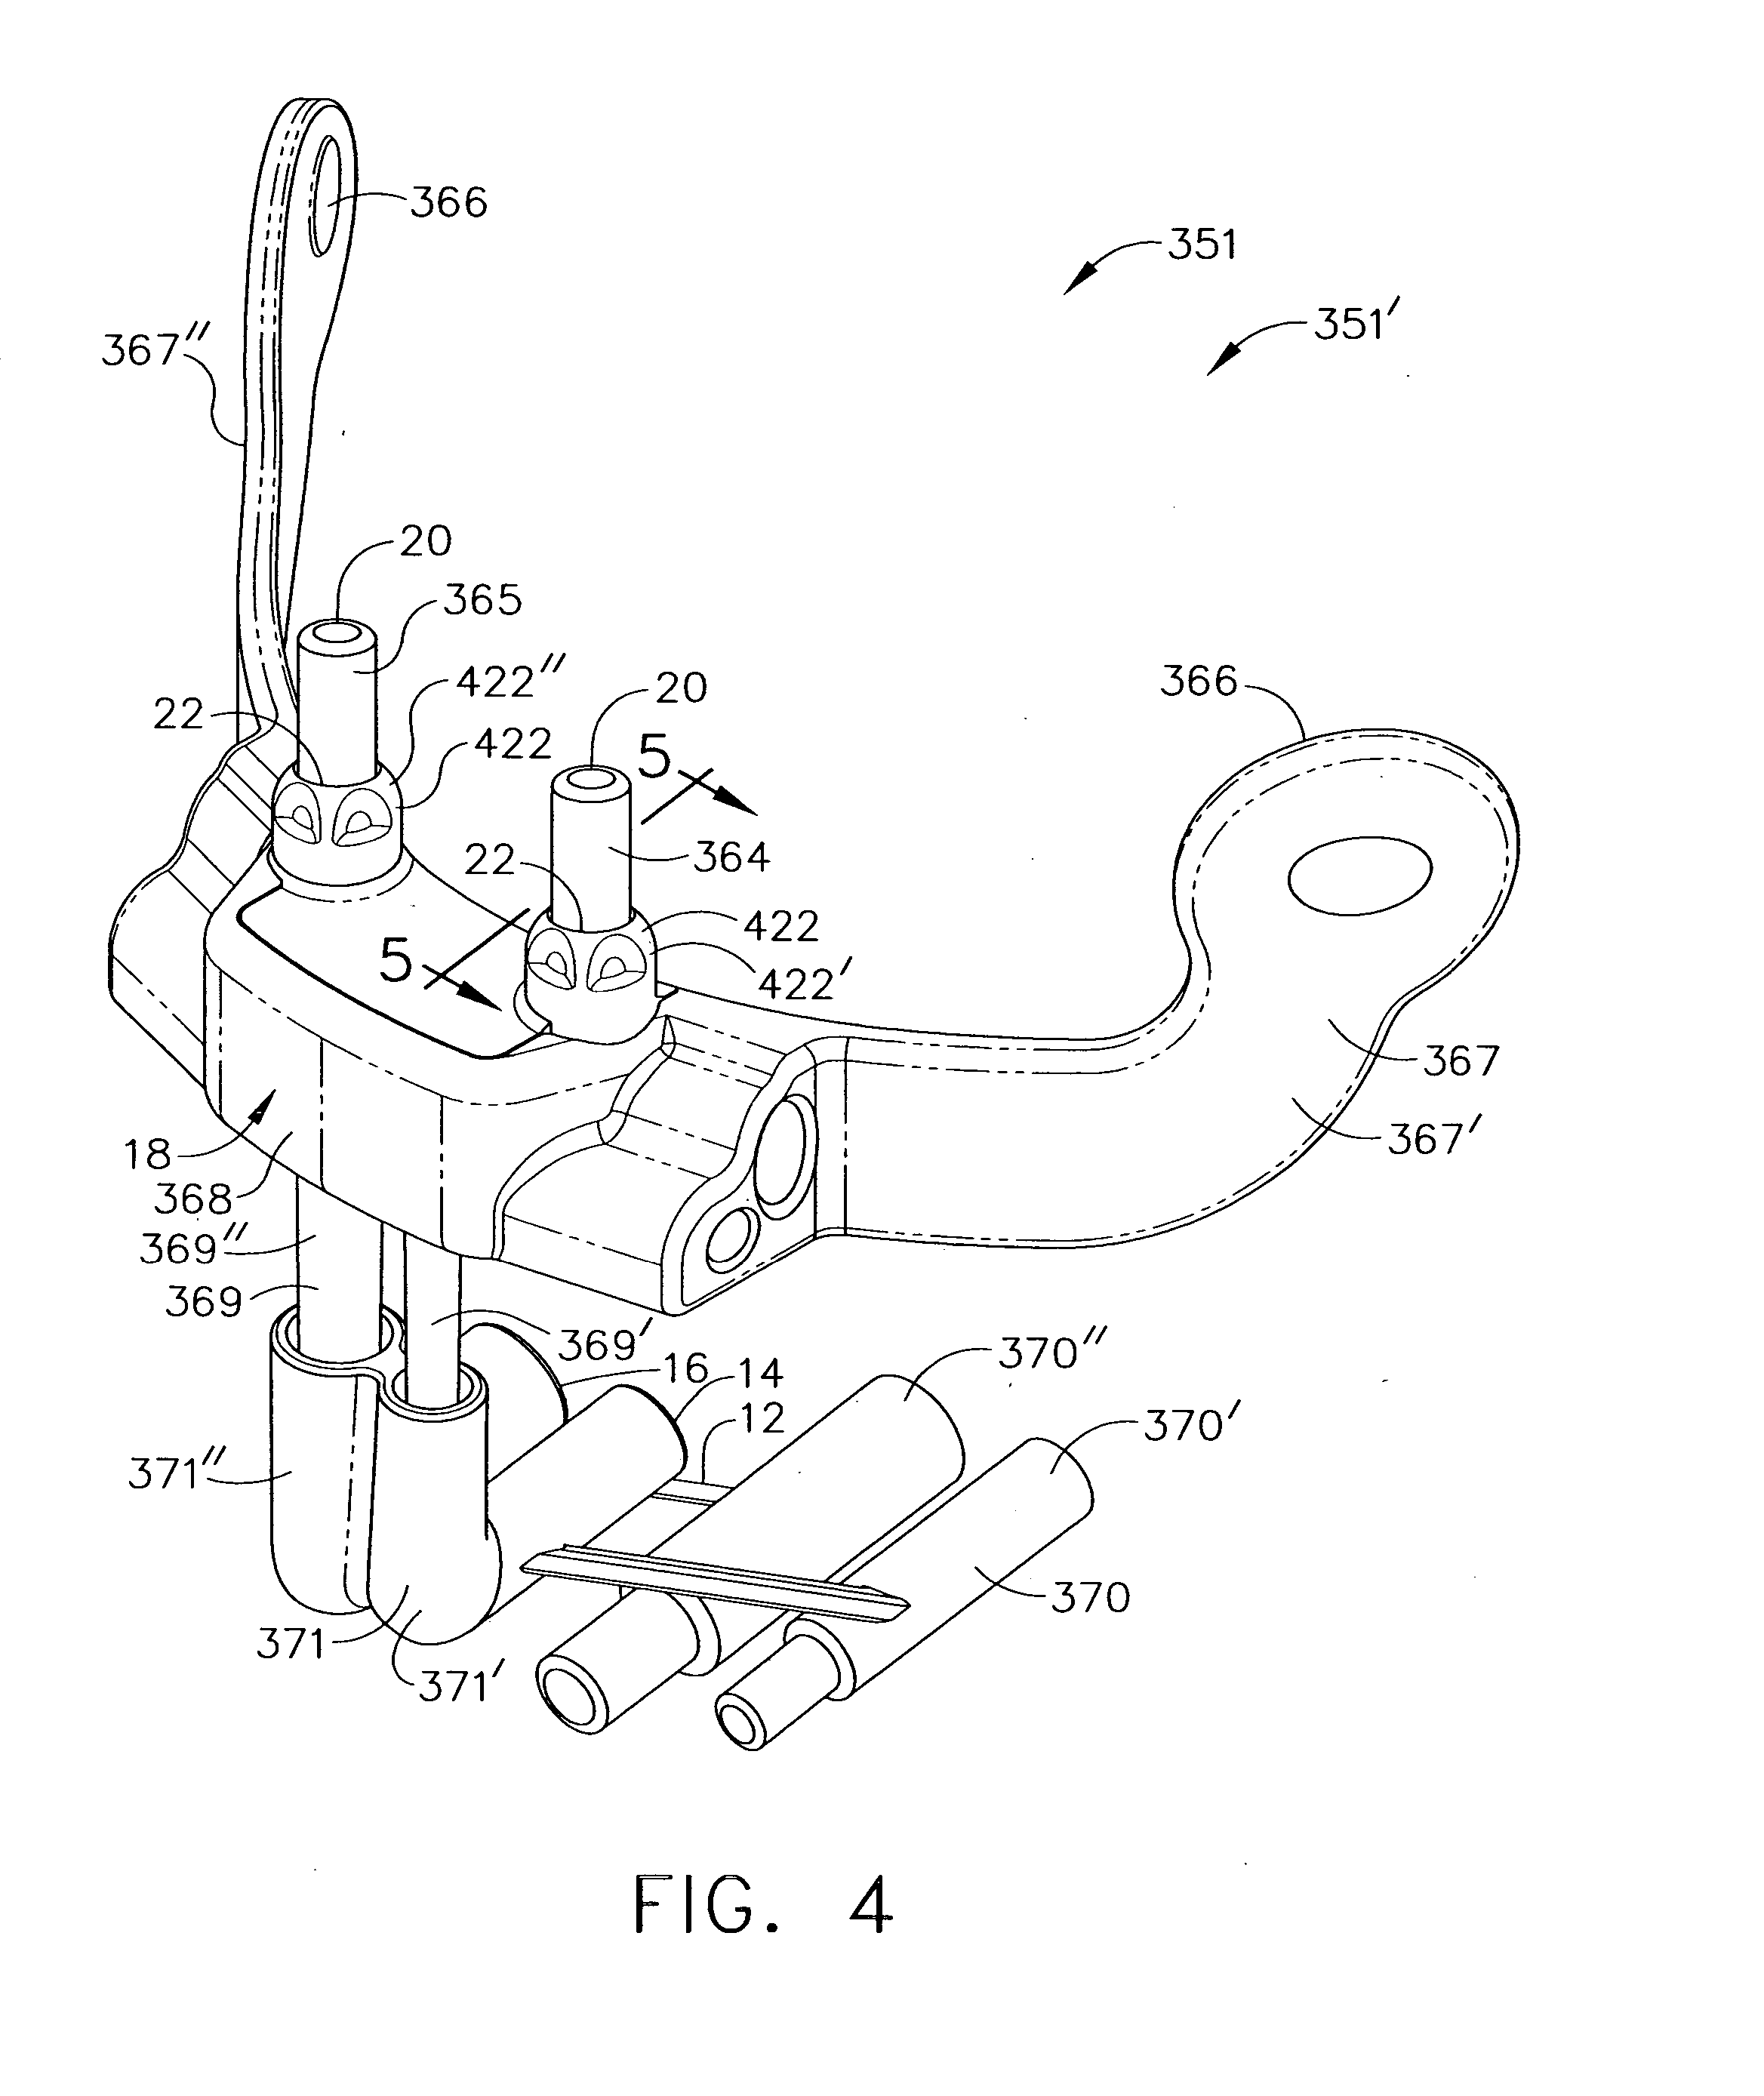 Apparatus to deliver oxygen to a patient